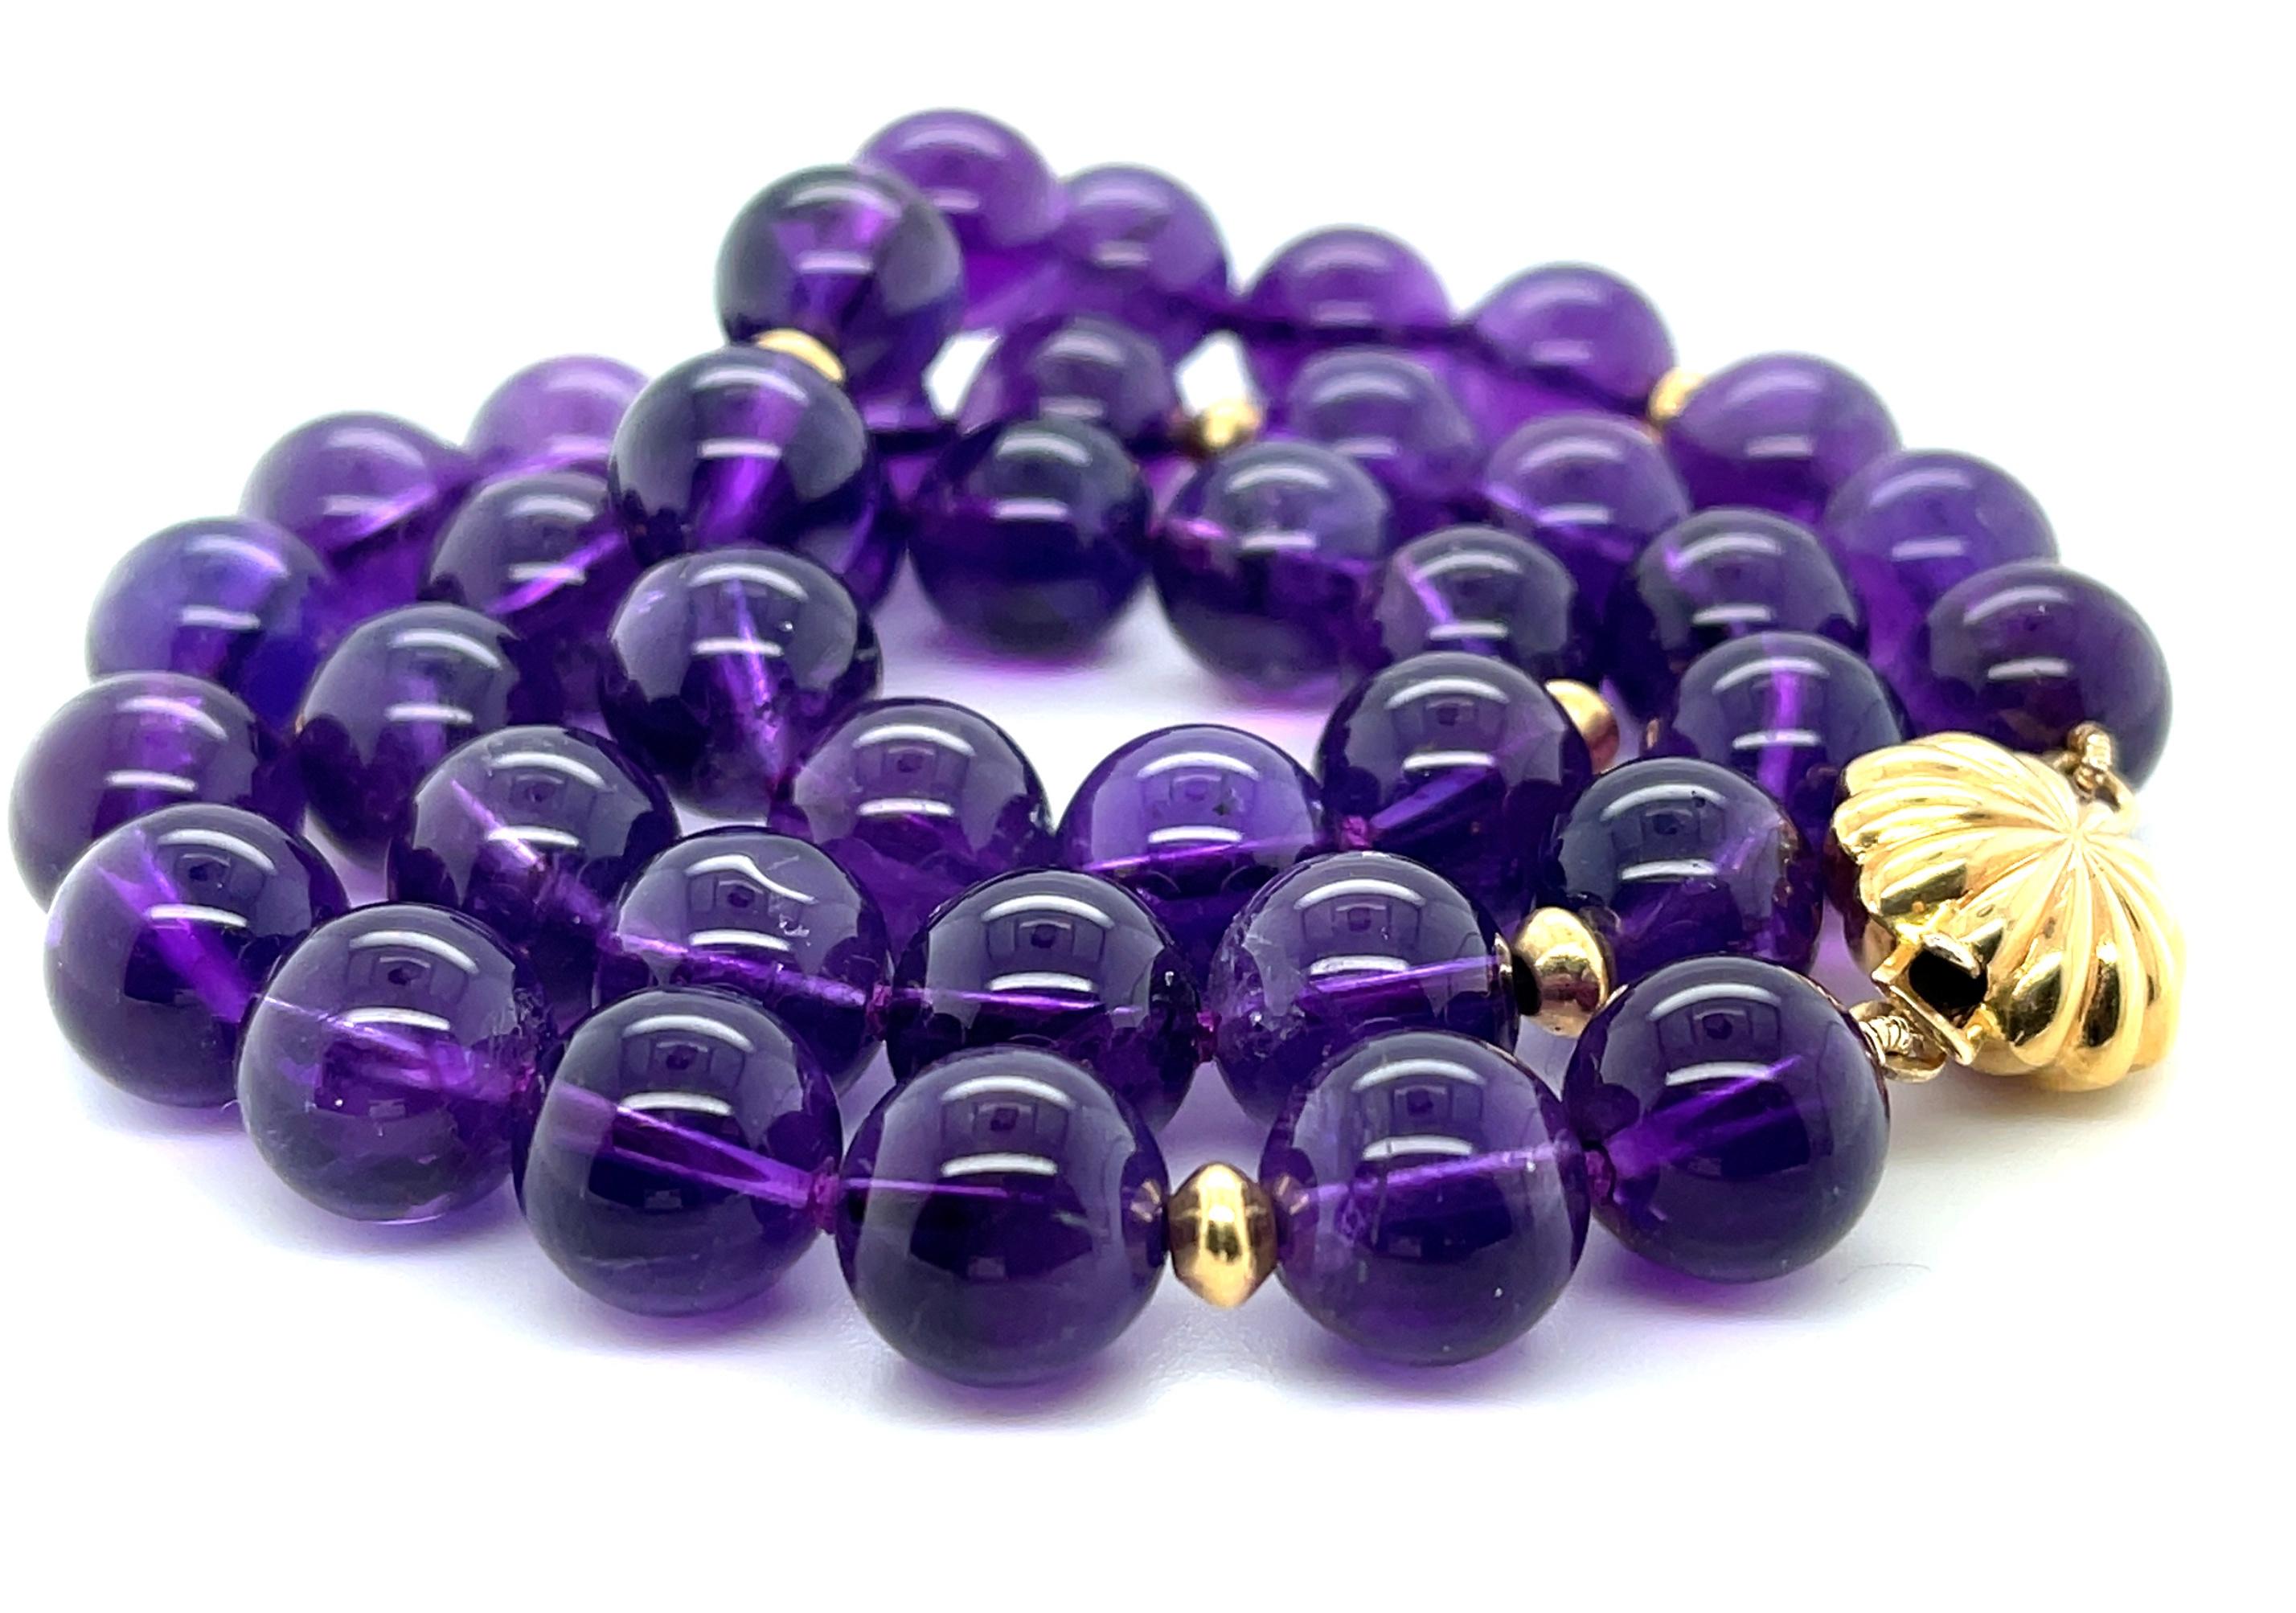 Artisan 10mm Amethyst Bead Necklace with Yellow Gold Accents, 18 Inches  For Sale